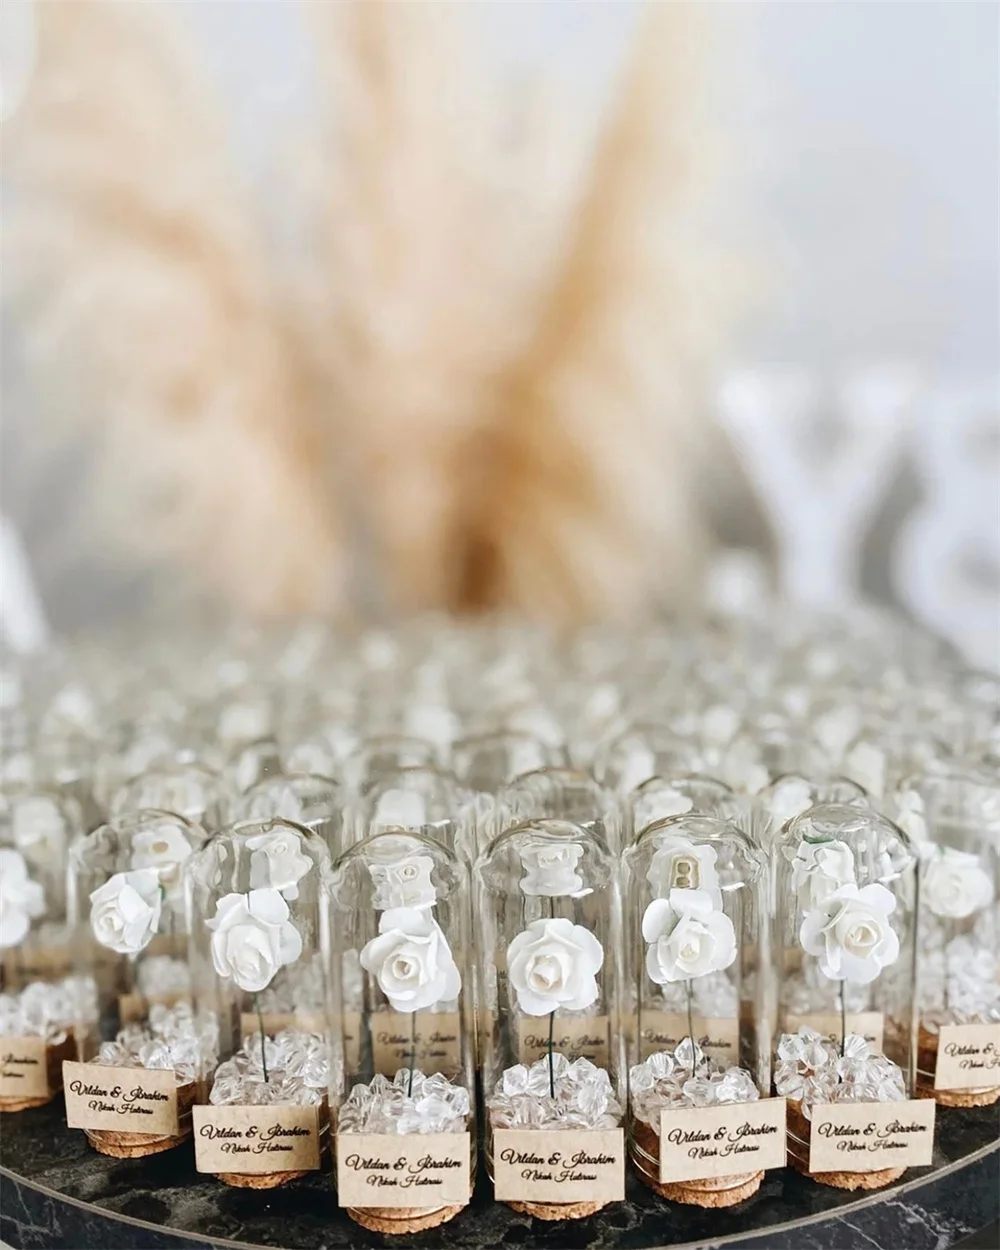 

15pcs Personalized Wedding Favors for Guests, Rustic Wedding Favors, Beach Wedding Engagement Party Gifts, Glass Dome Favors,